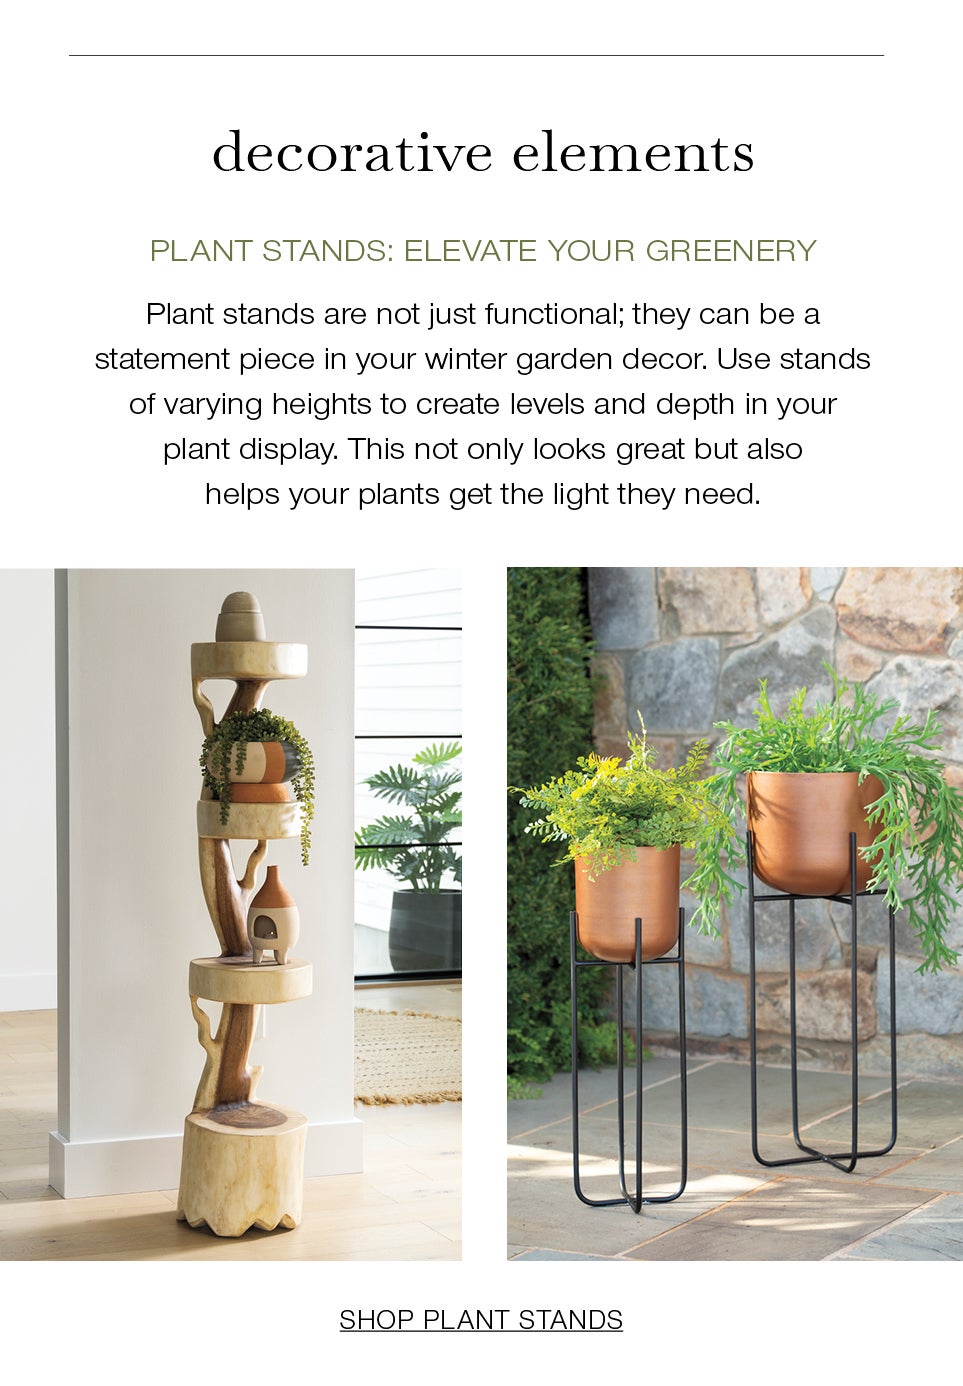 Decorative Elements<br /><br />Plant Stands: Elevate Your Greenery<br />Plant stands are not just functional; they can be a statement piece in your winter garden decor. Use stands of varying heights to create levels and depth in your plant display. This not only looks great but also helps your plants get the light they need.